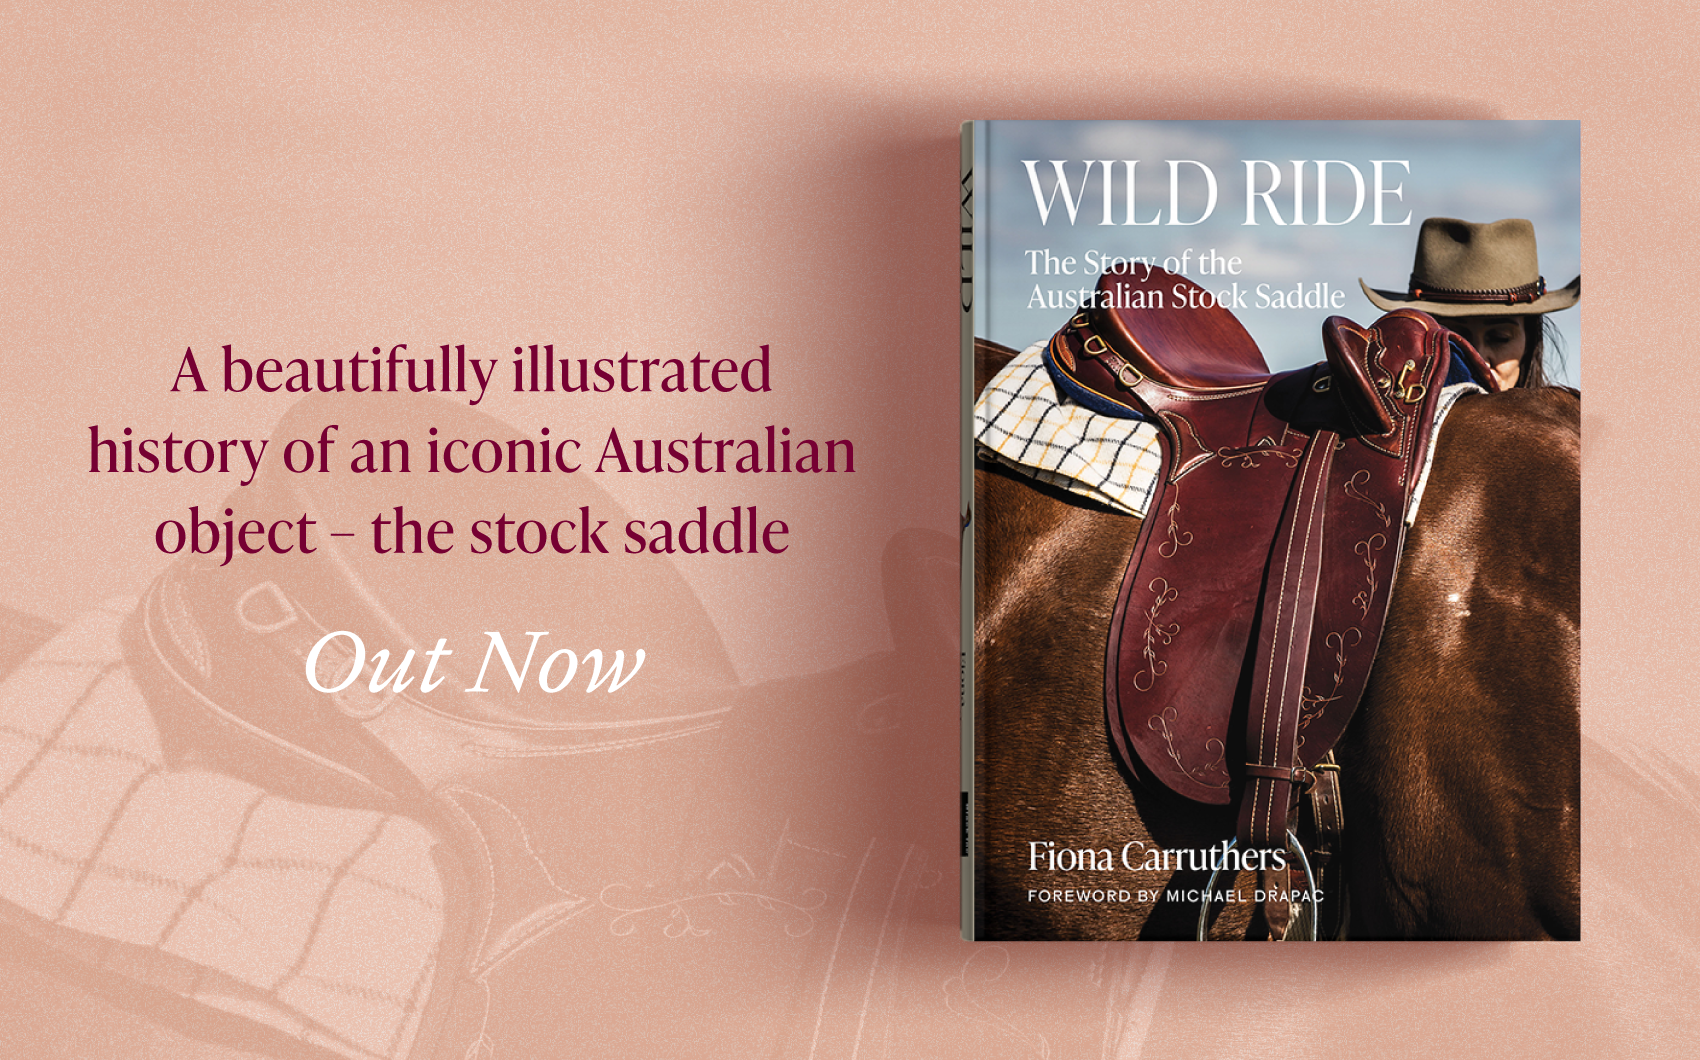 Out now: Wild Ride